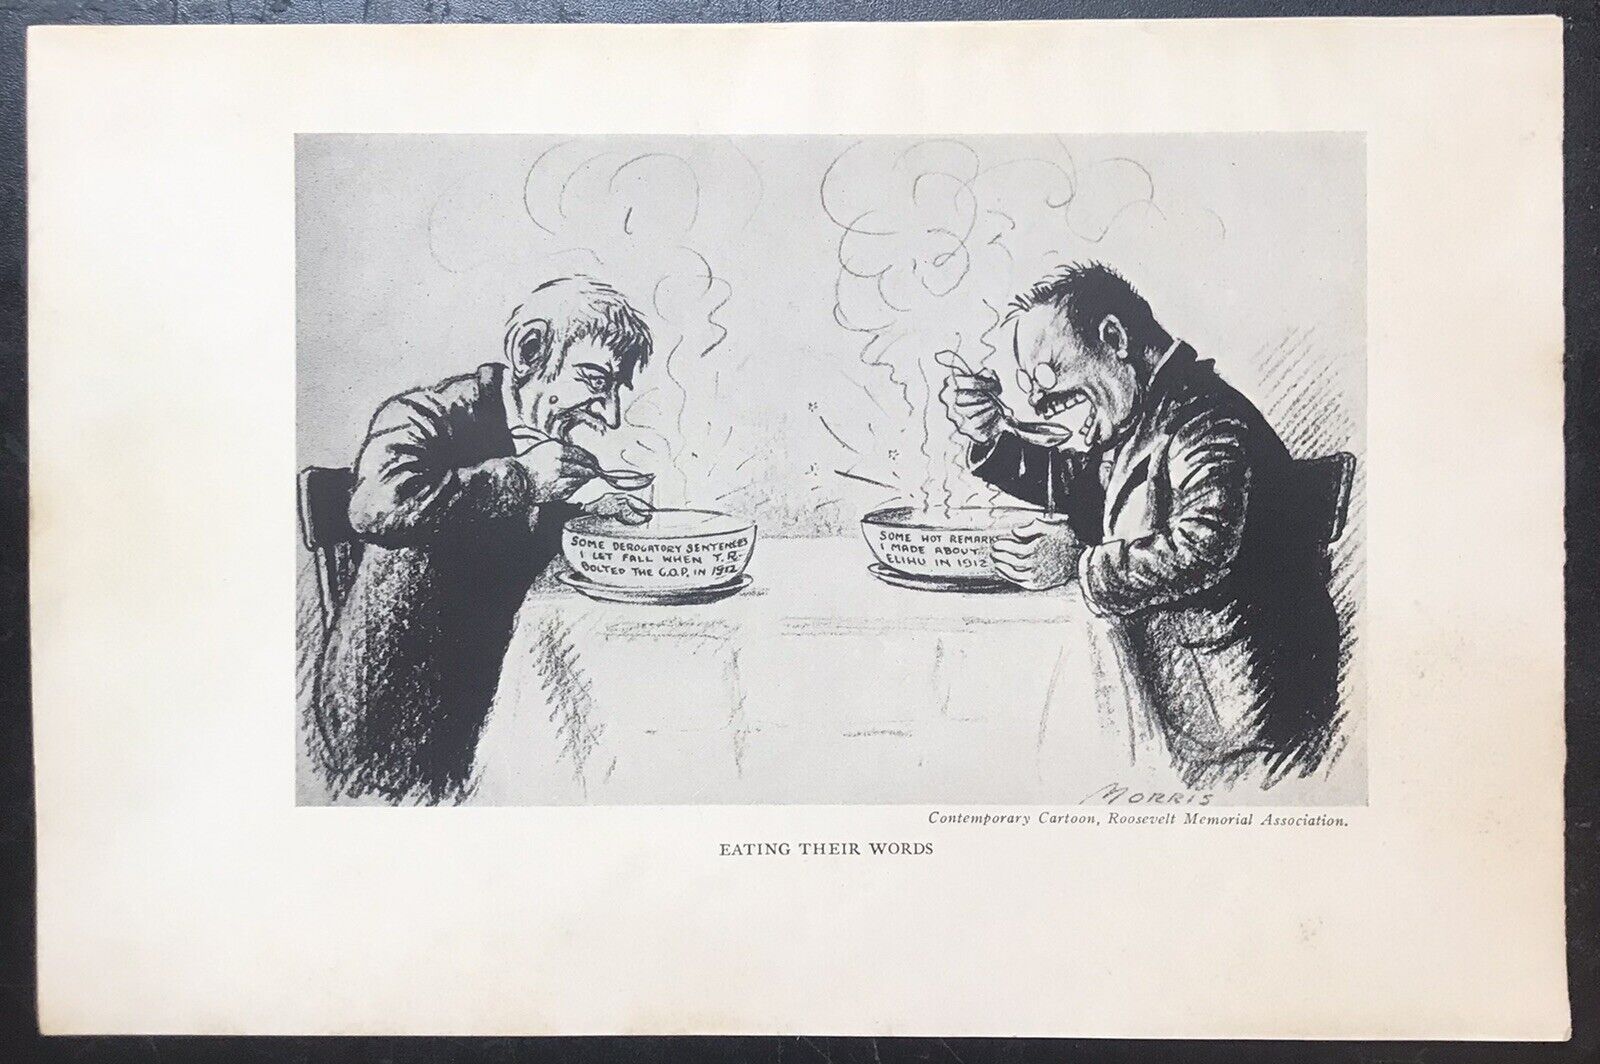 VINTAGE CONTEMPORARY CARTOON OF PRESIDENT ROOSEVELT EATING HIS WORDS.MORRIS